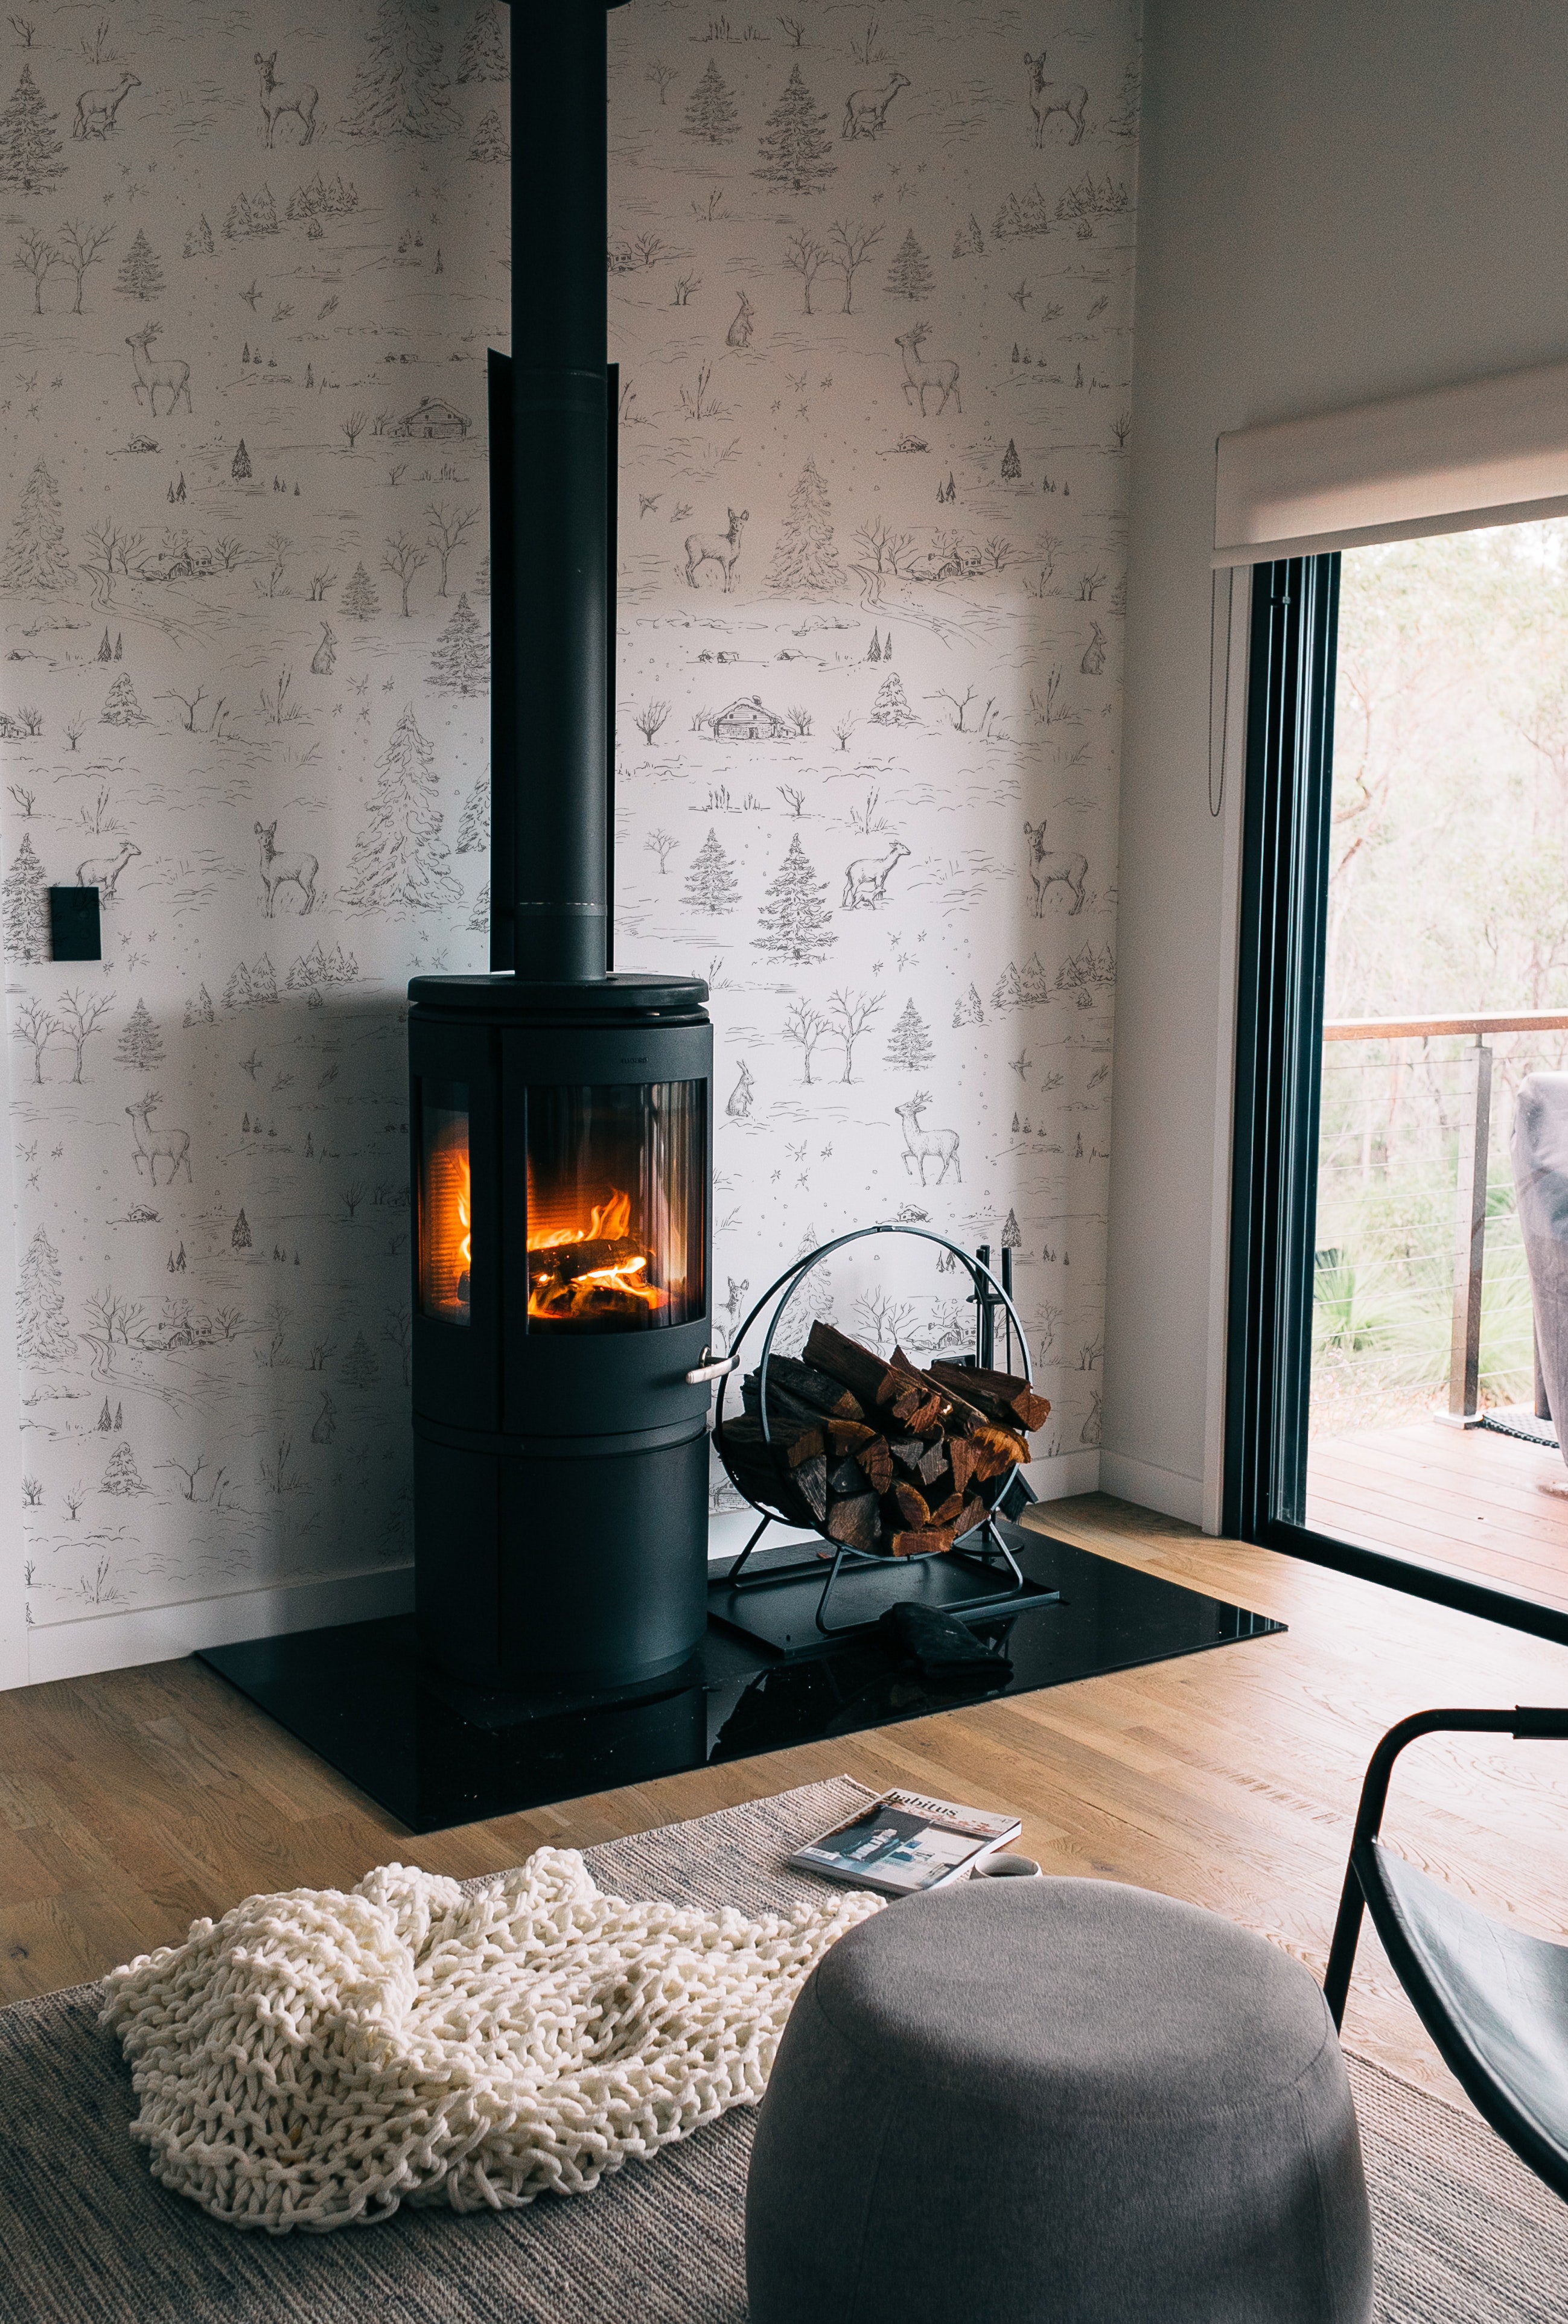 A stylish interior showcasing the winter wildlife wallpaper with its detailed sketches of forest animals and snow-covered landscapes, adding a serene and rustic charm to the room, complemented by a modern wood-burning stove.